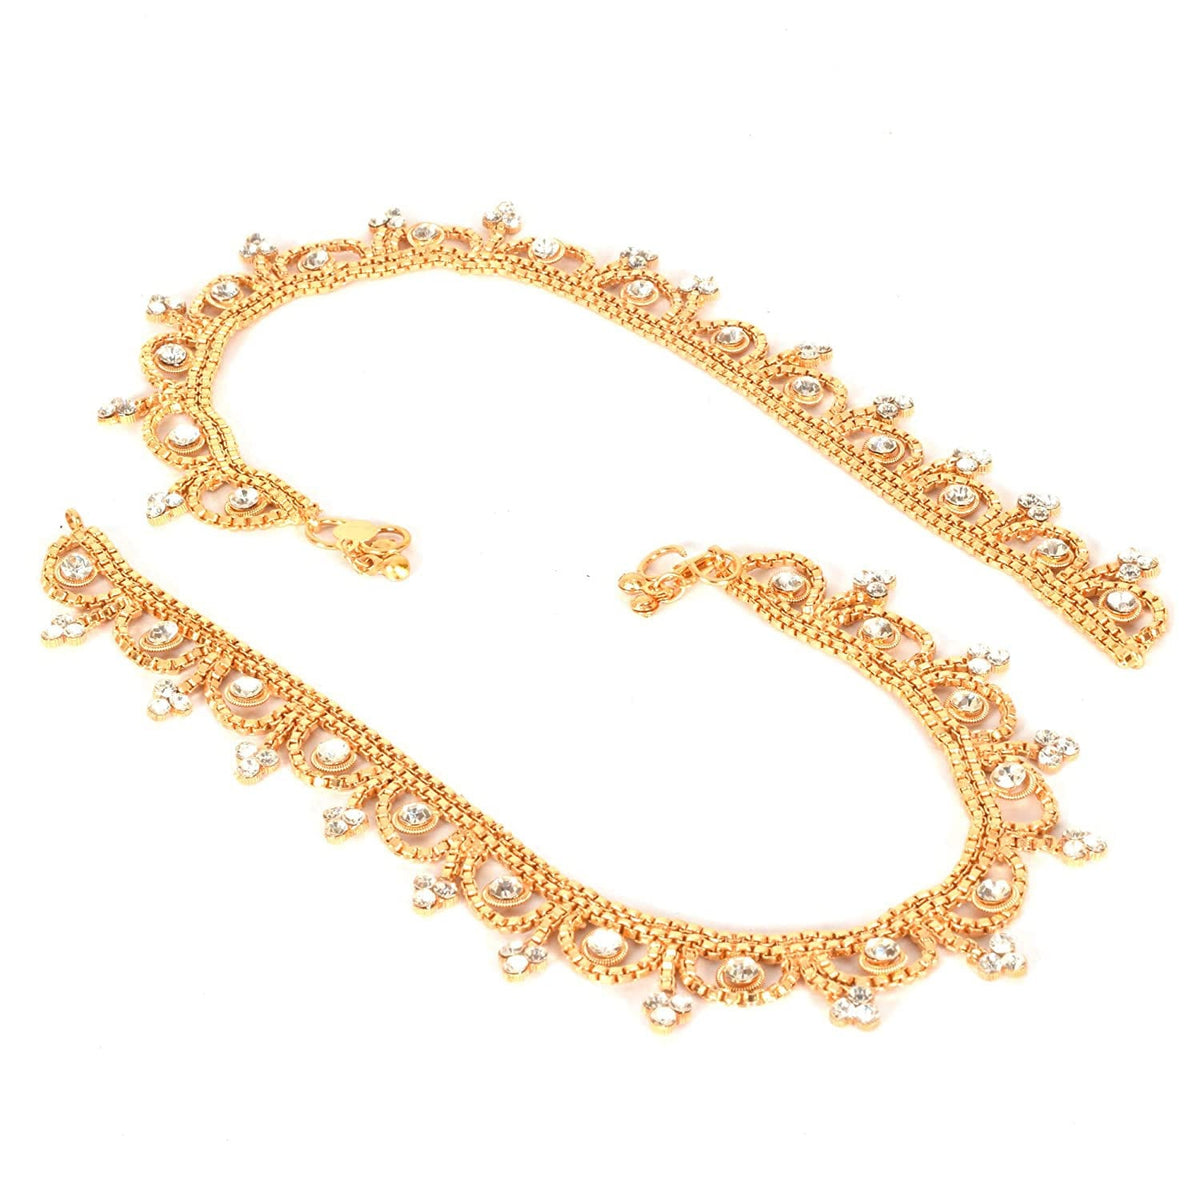 Traditional Gold Plated Thin String Anklet Handcrafted Payal/Anklets, Anklets for women, Indian anklet, Gold ankle bracelet pair for women